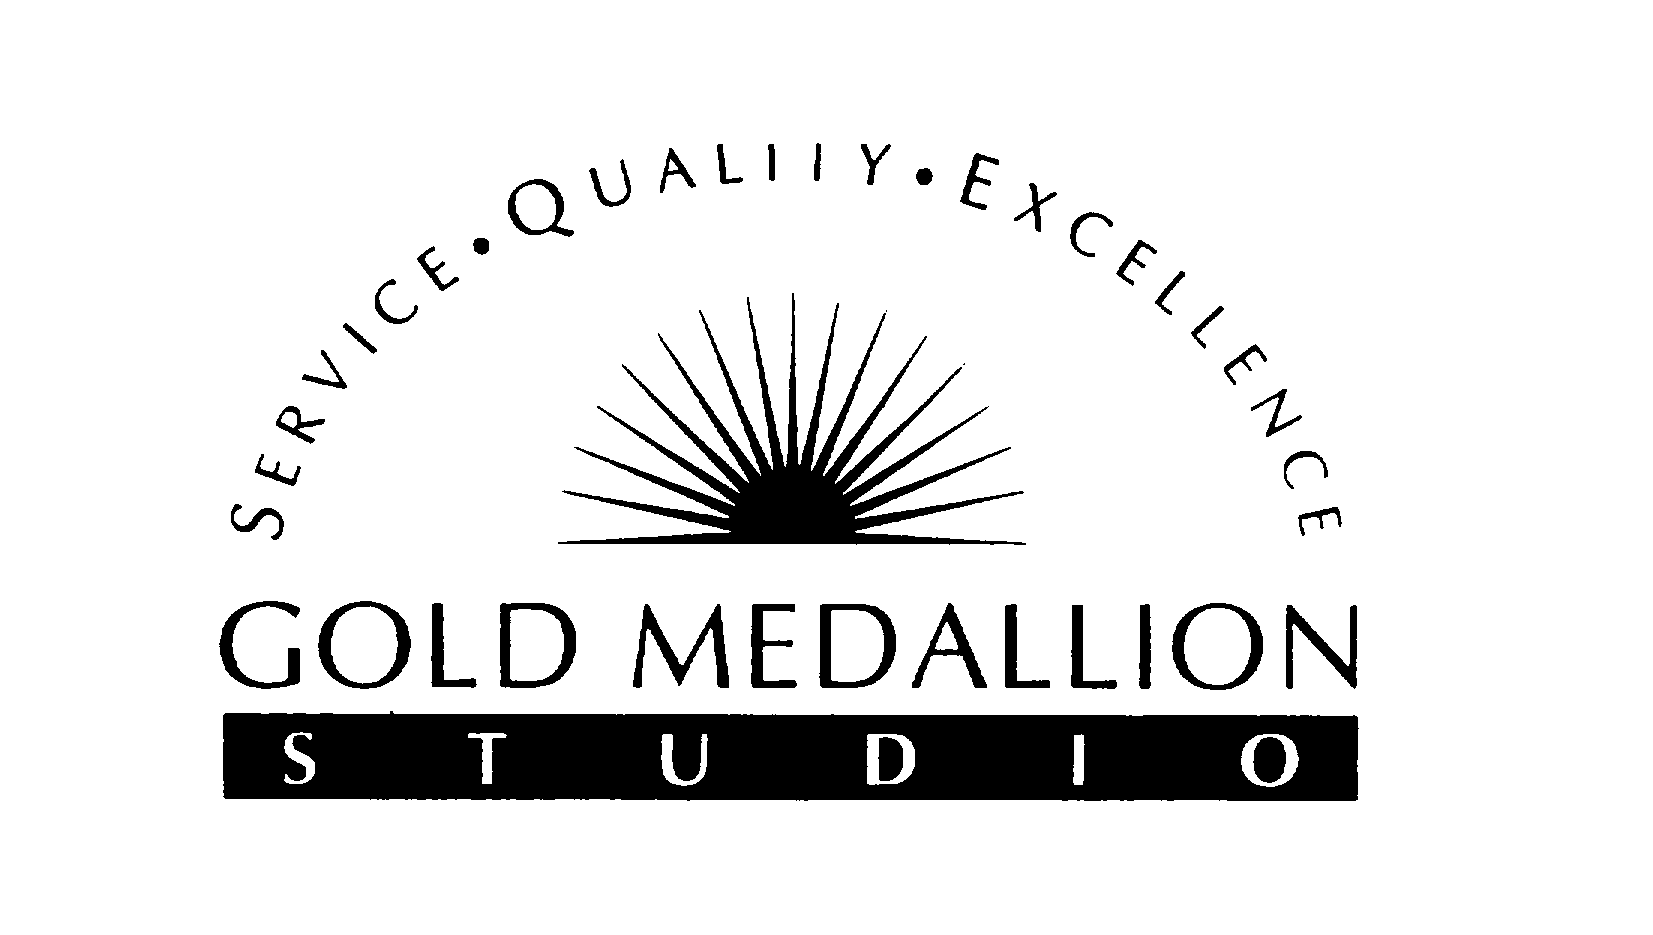  GOLD MEDALLION STUDIO SERVICE QUALITY EXCELLENCE